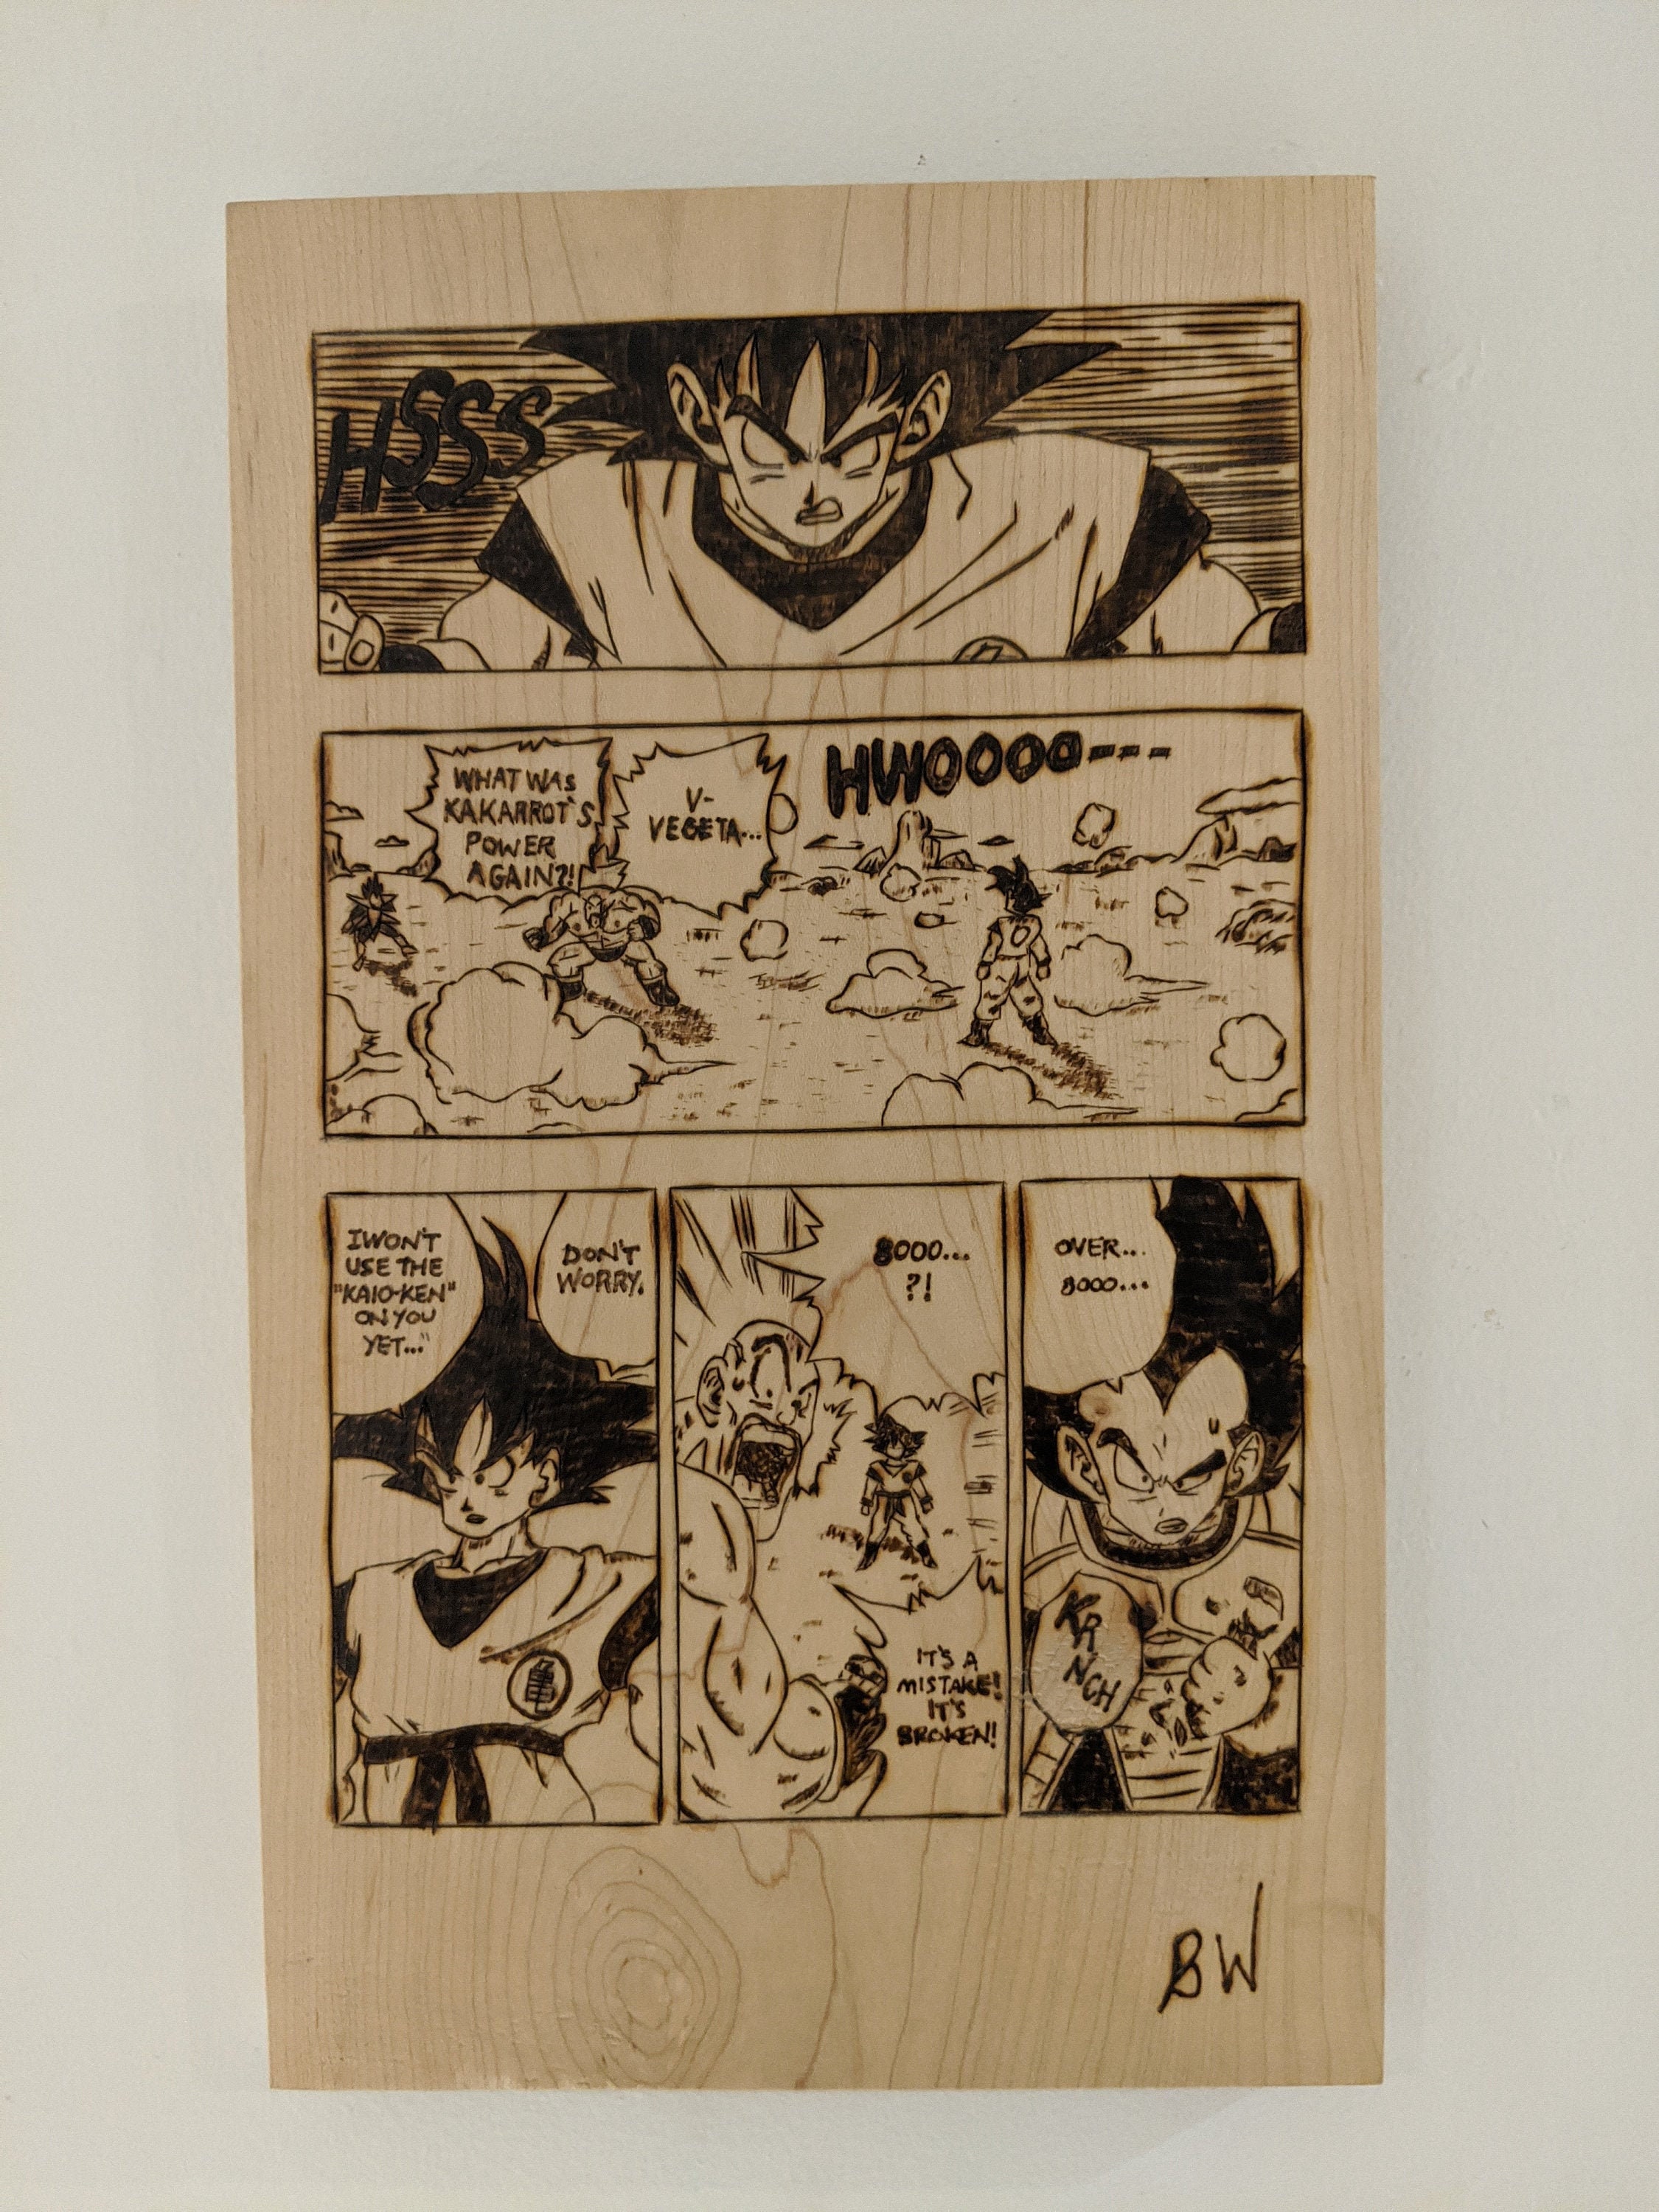 What's the most impressive panel you ever saw in the manga? : r/dbz